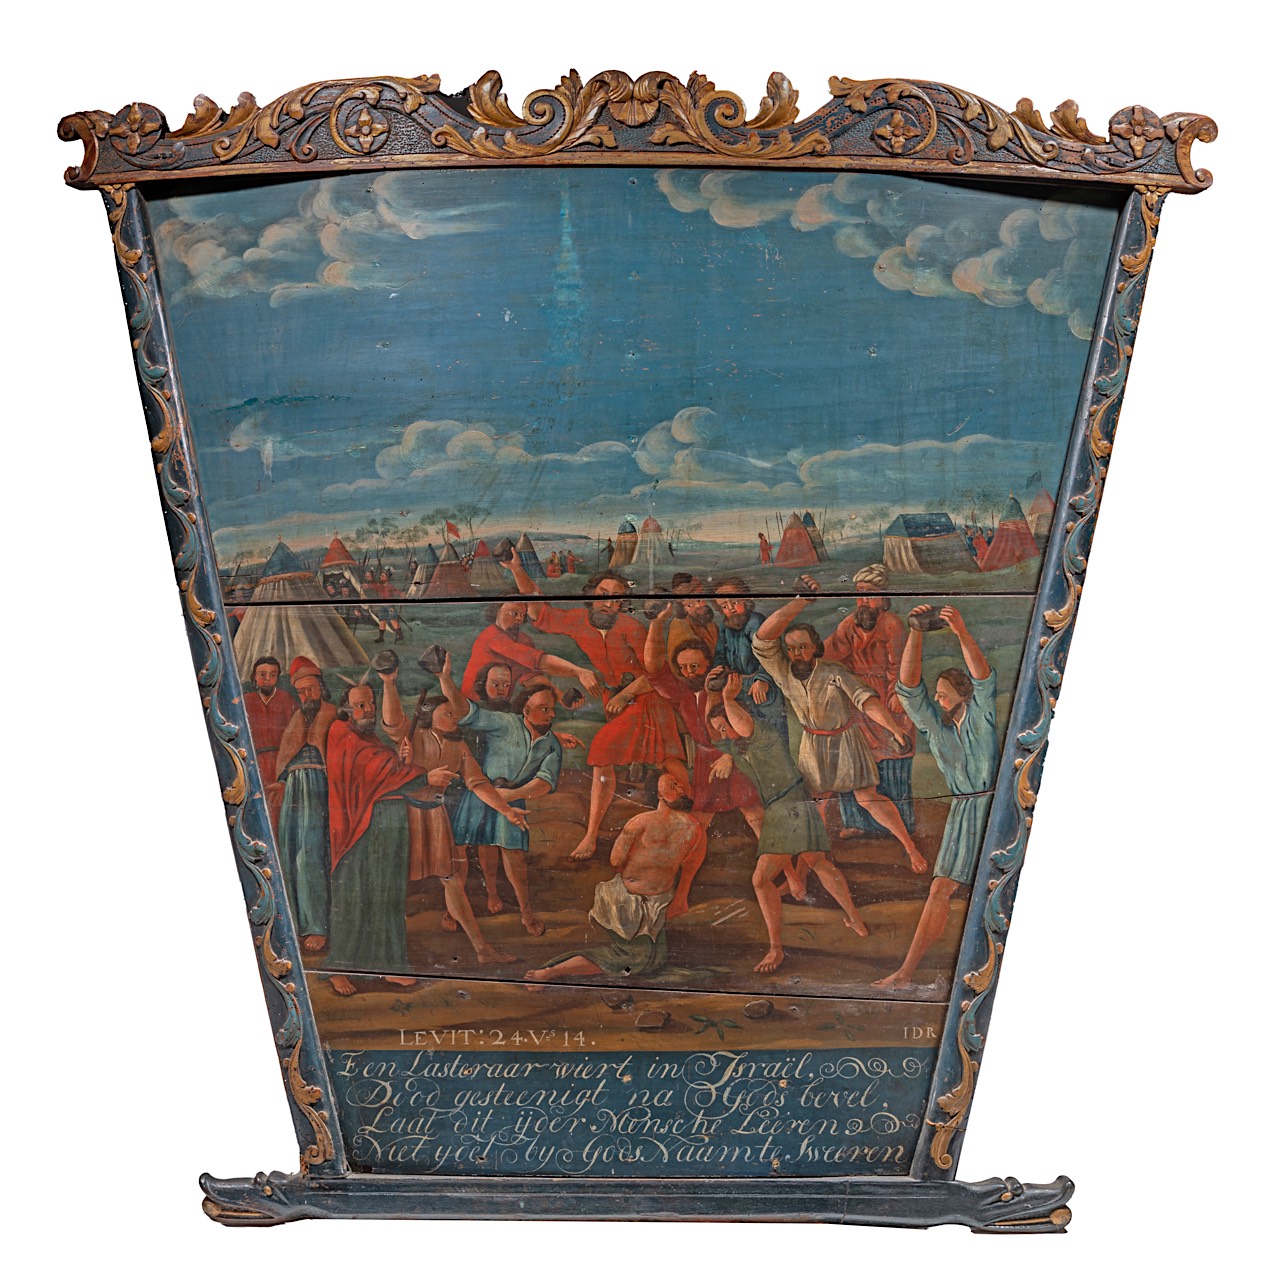 An 18thC Dutch moralizing painted and carved panel depicting the bible story of Leviticus 24:14 130